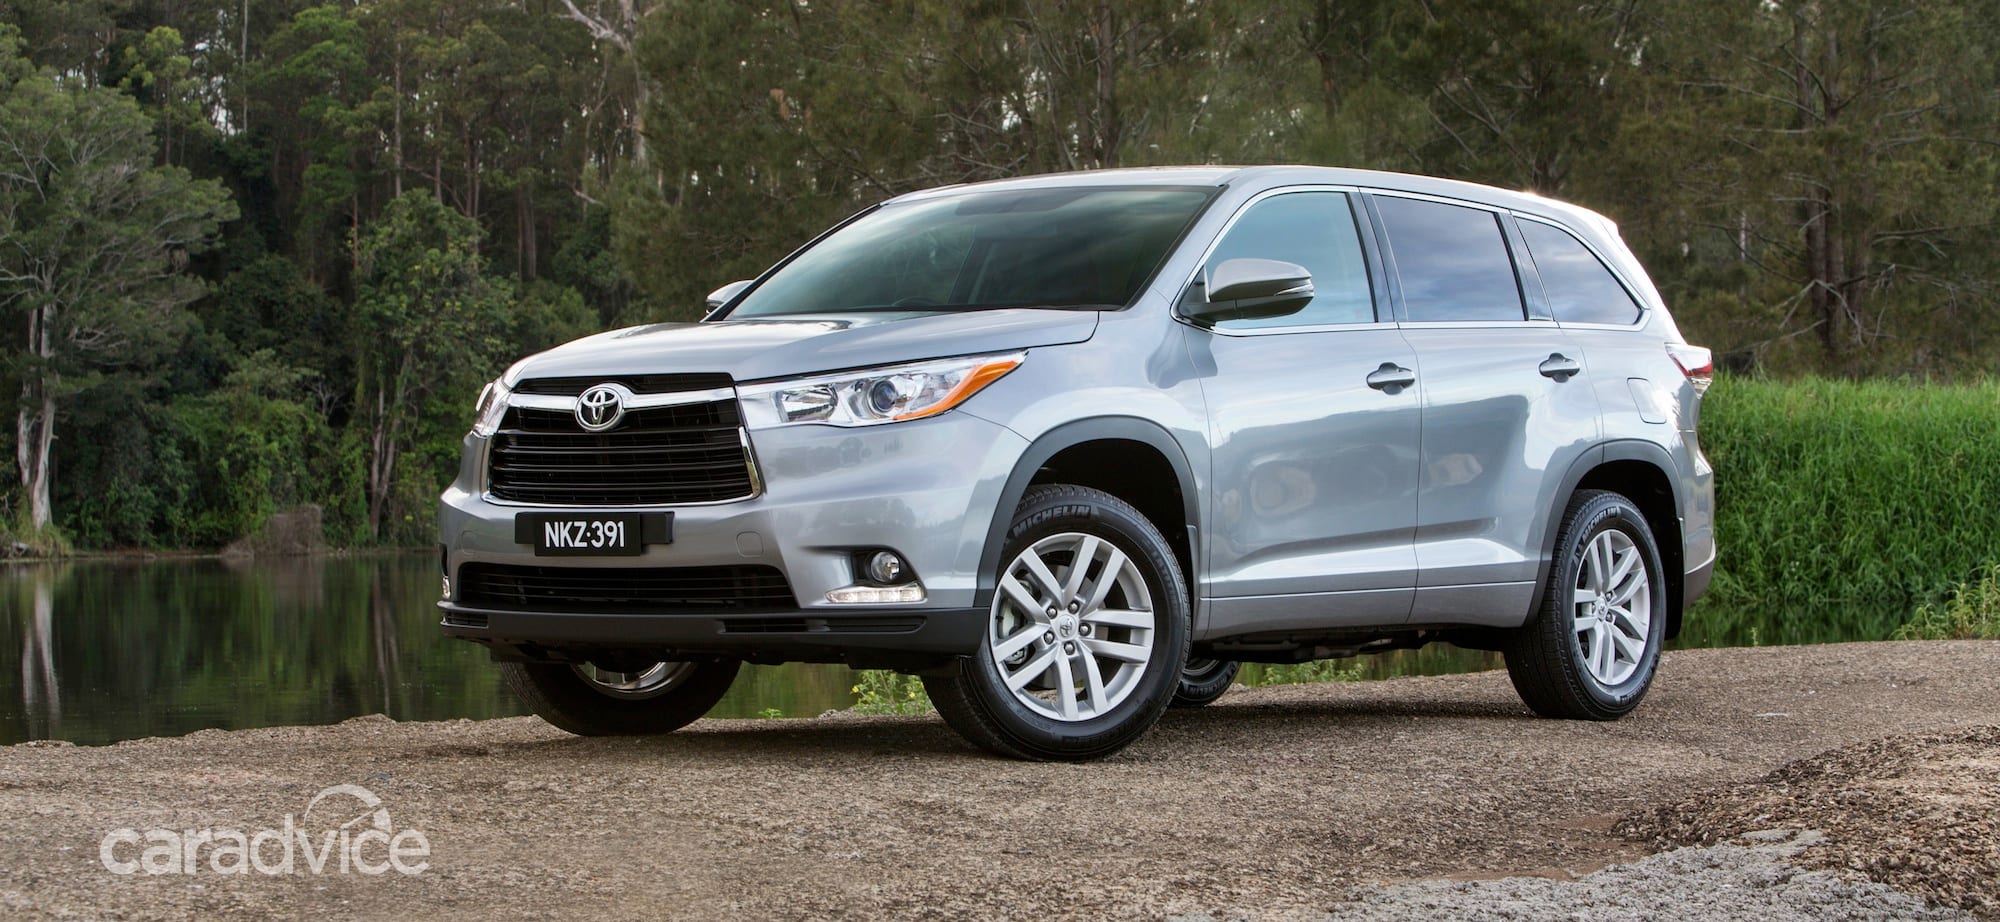 2014 Toyota Kluger Review | CarAdvice